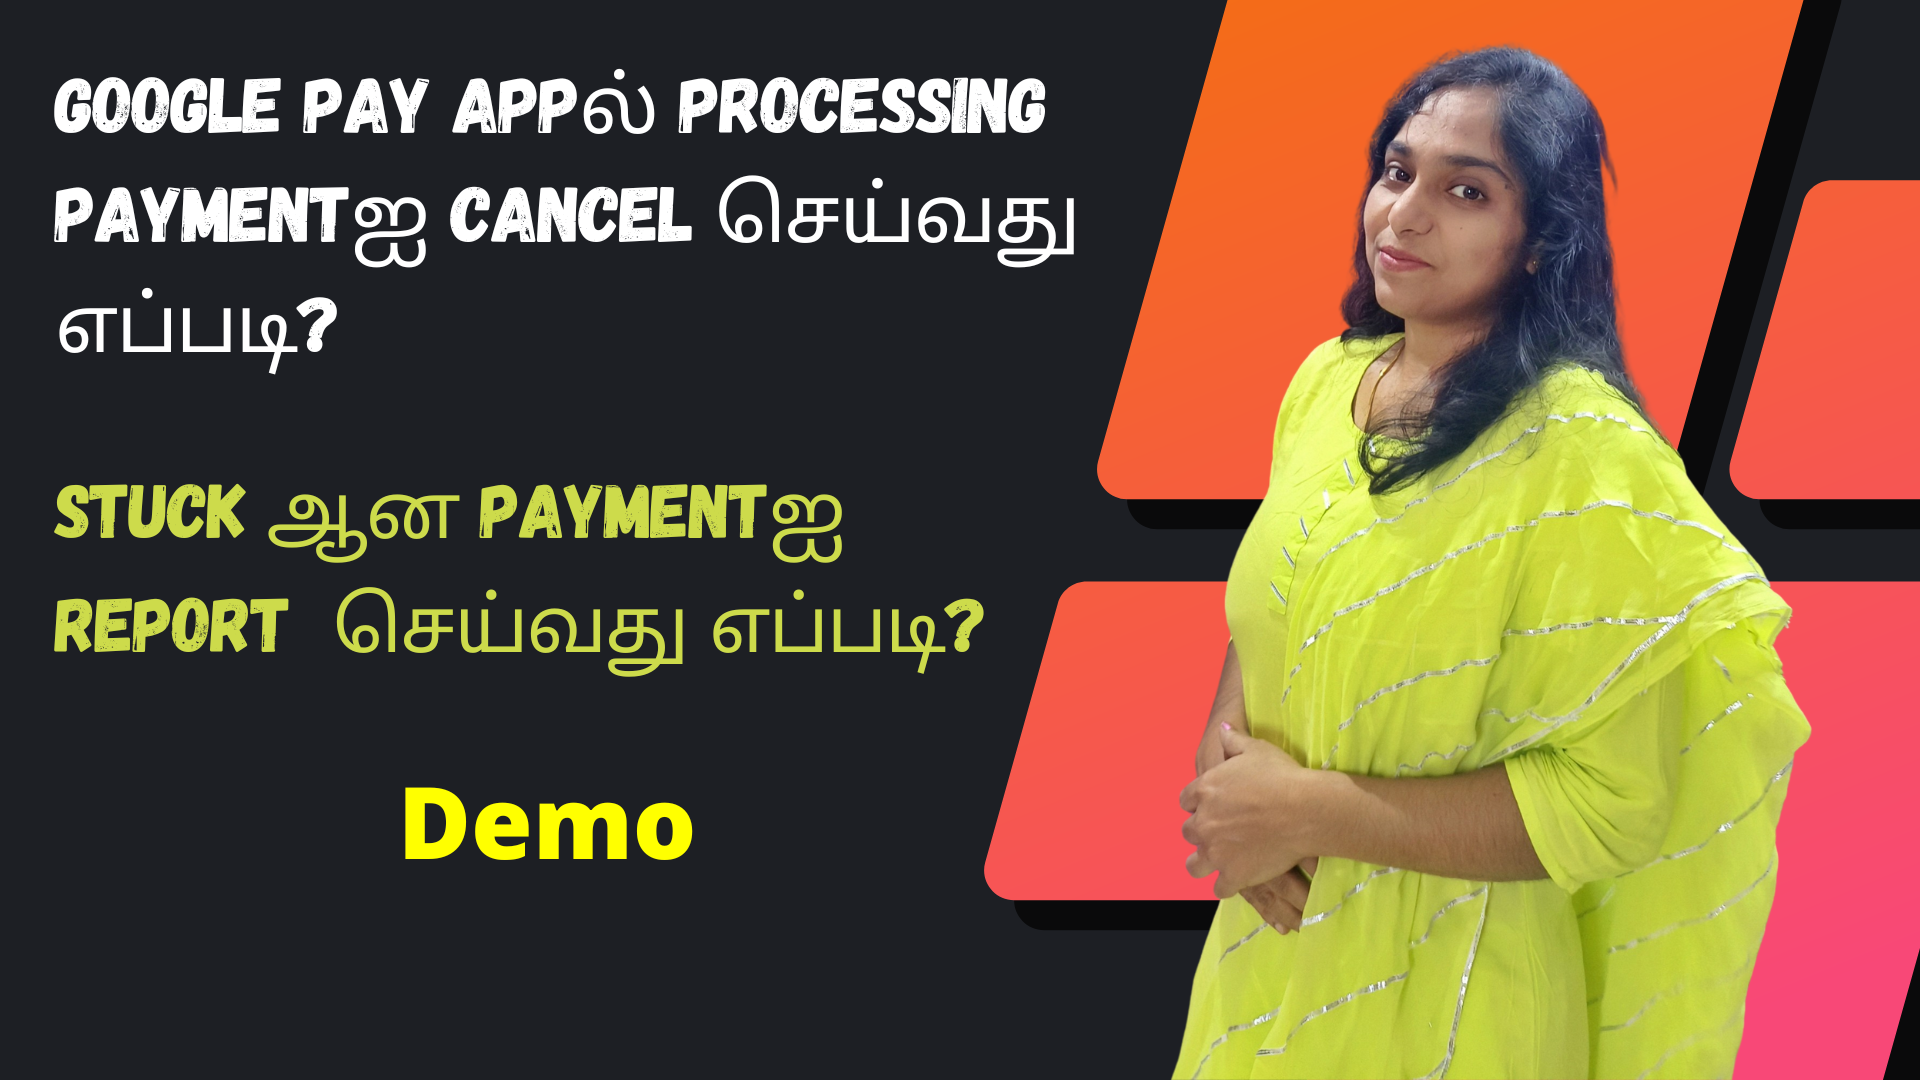 How To Cancel A Processing Transaction In GPay | How To Report A Stuck Google Pay Payment? Demo